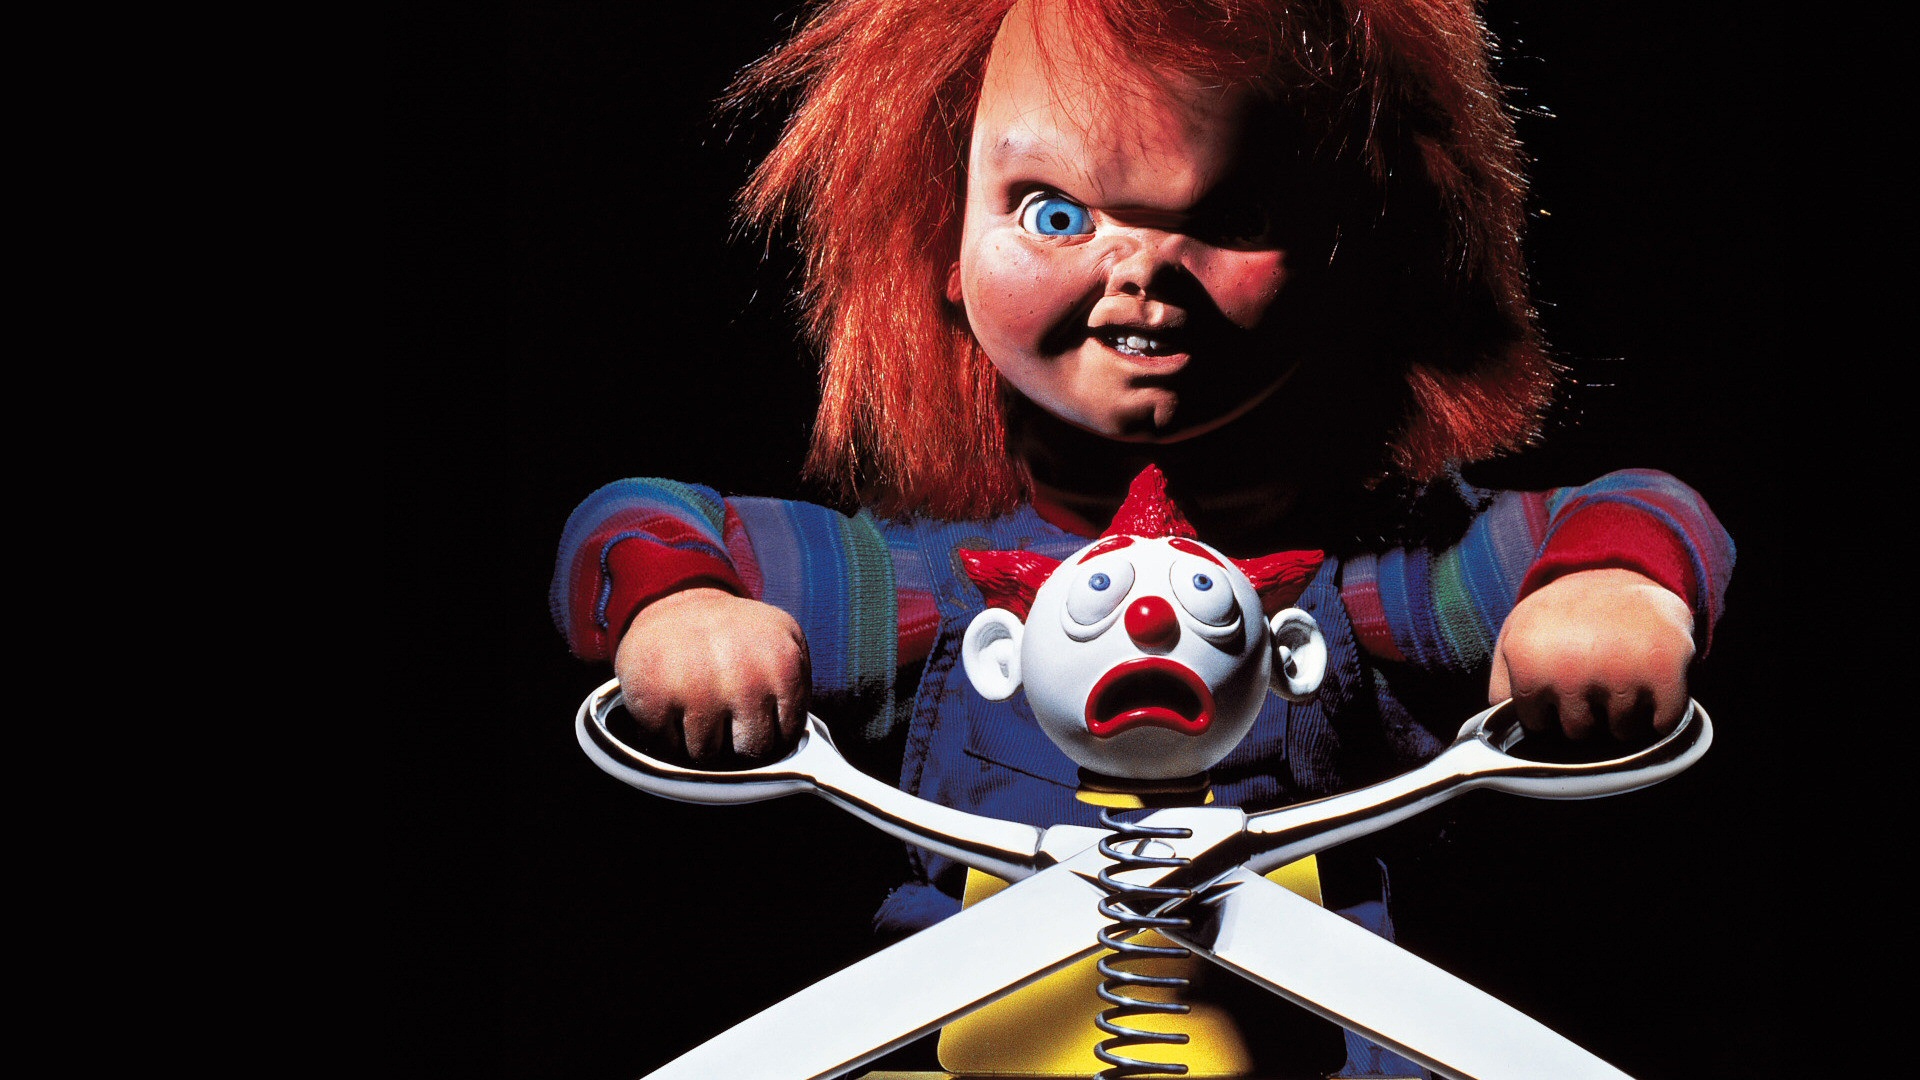 Chucky Photos Download The BEST Free Chucky Stock Photos  HD Images